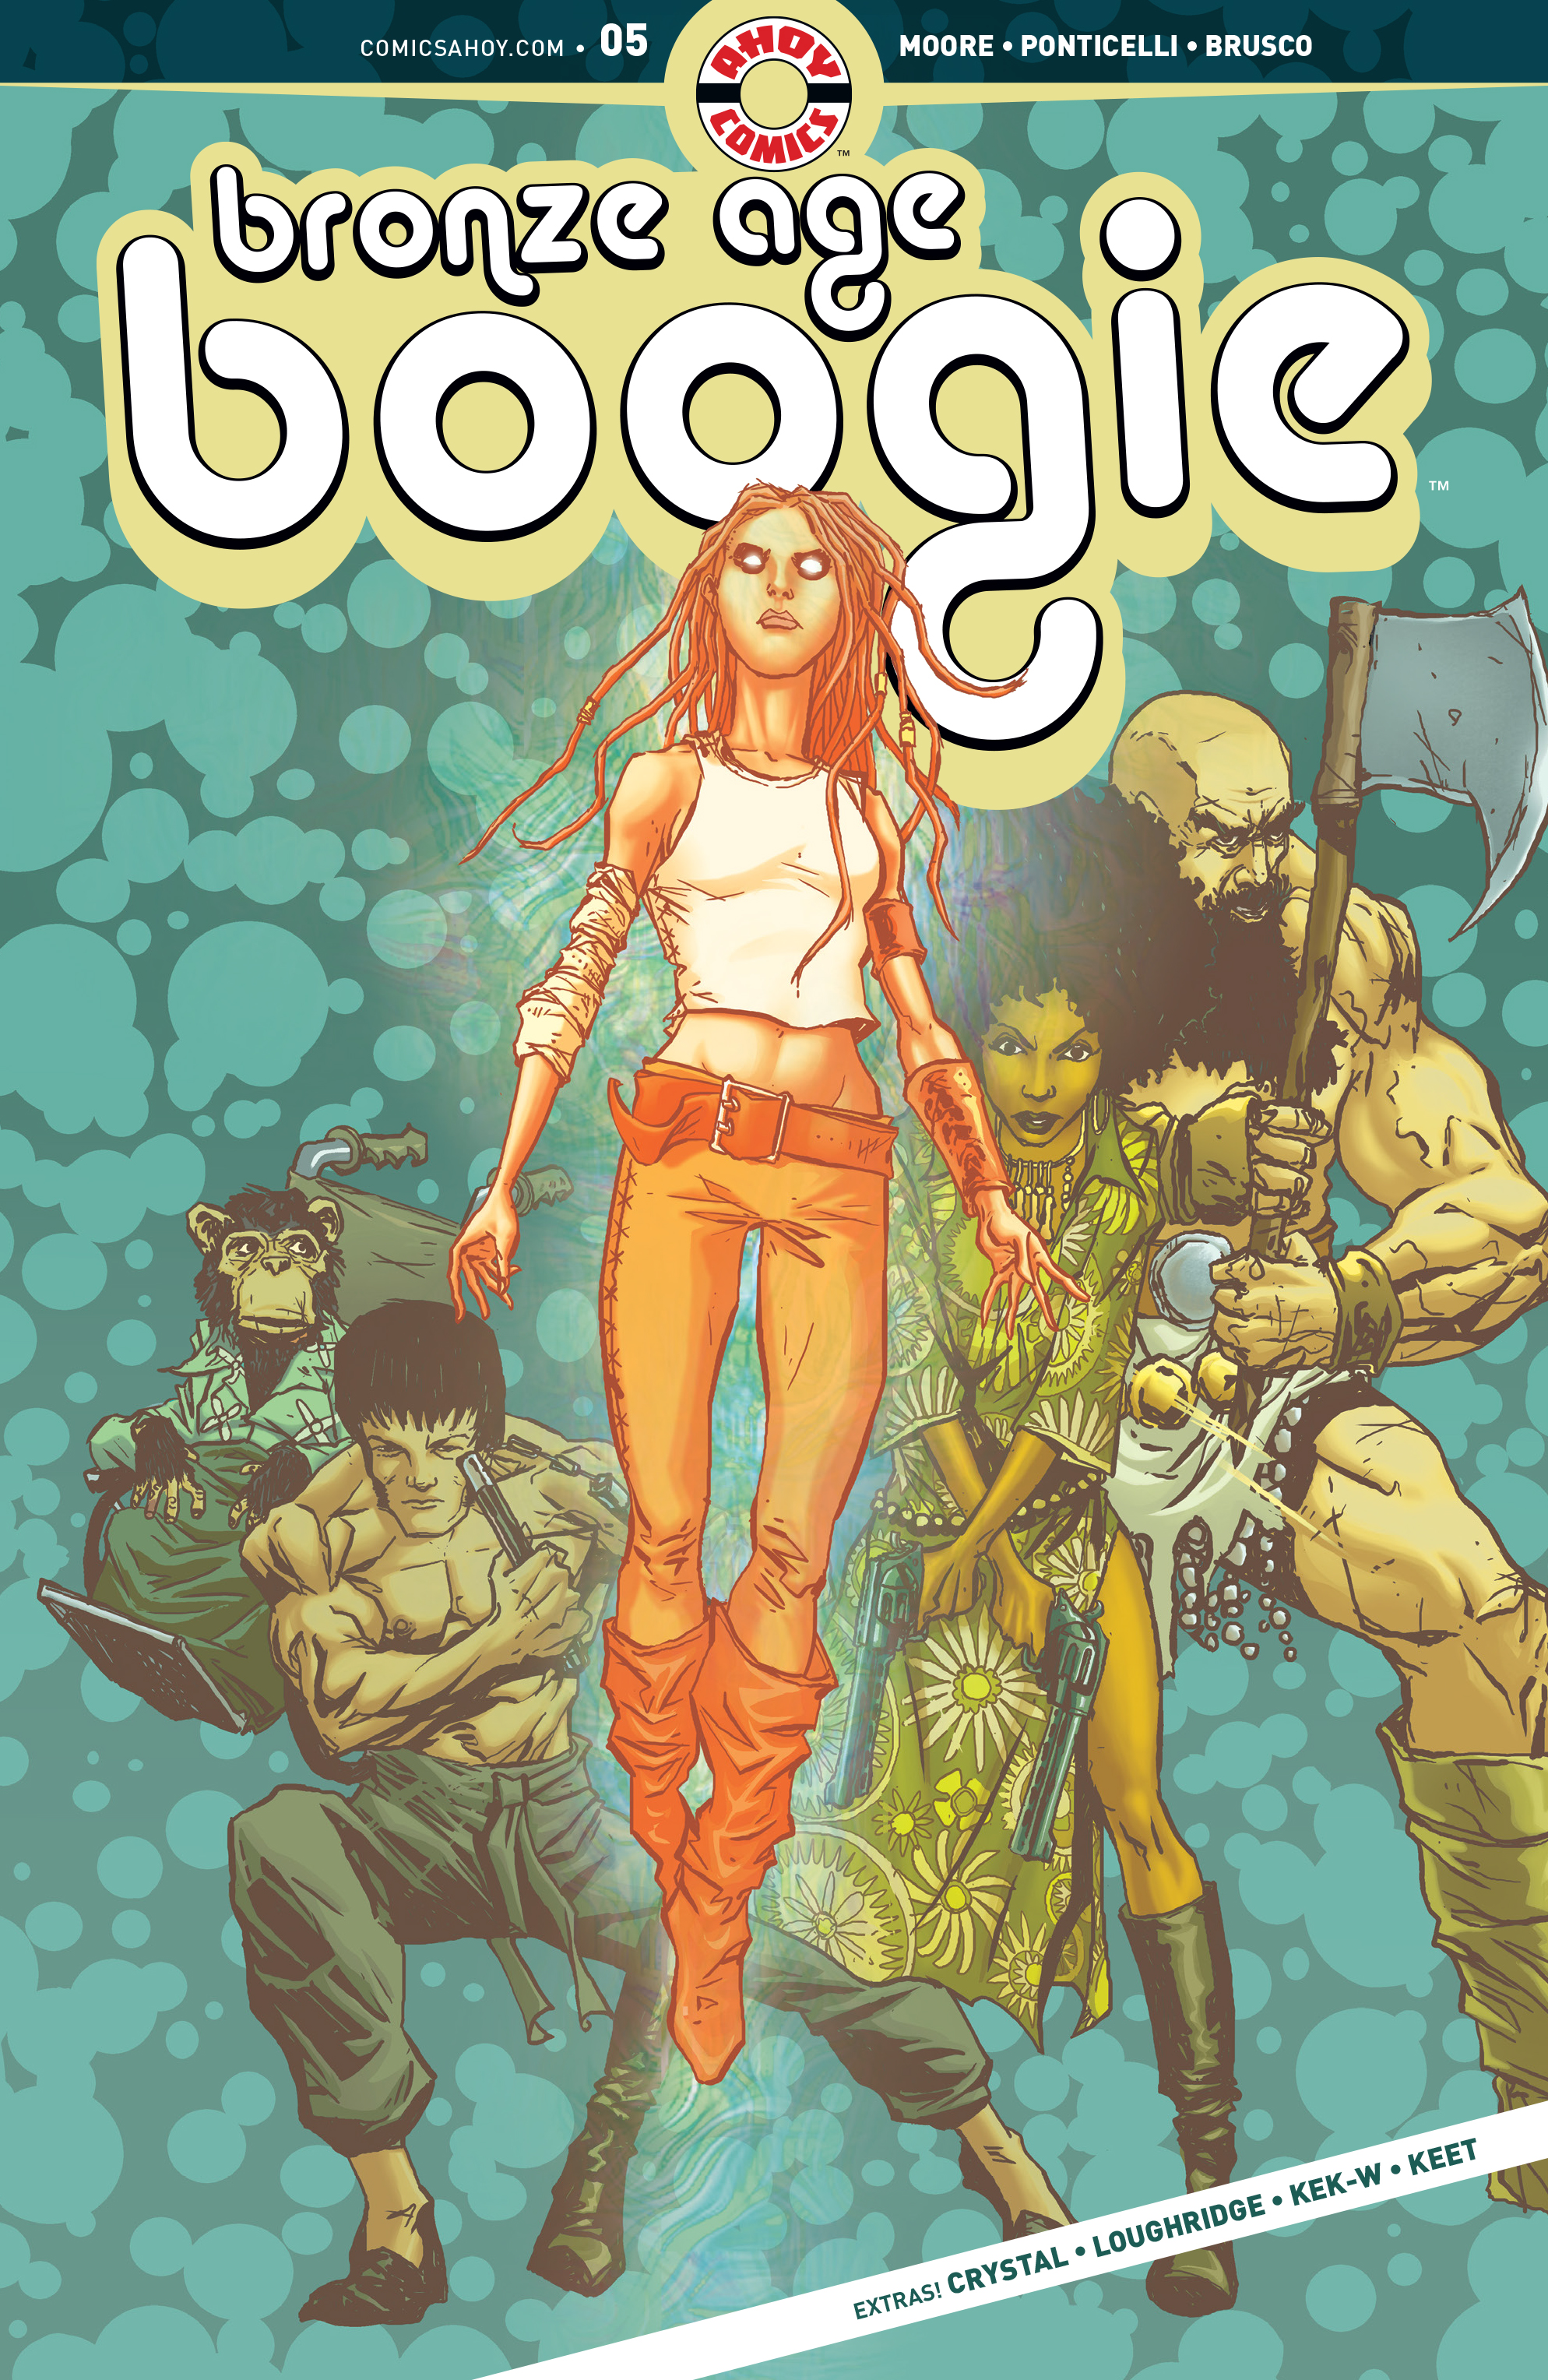 Read online Bronze Age Boogie comic -  Issue #5 - 1